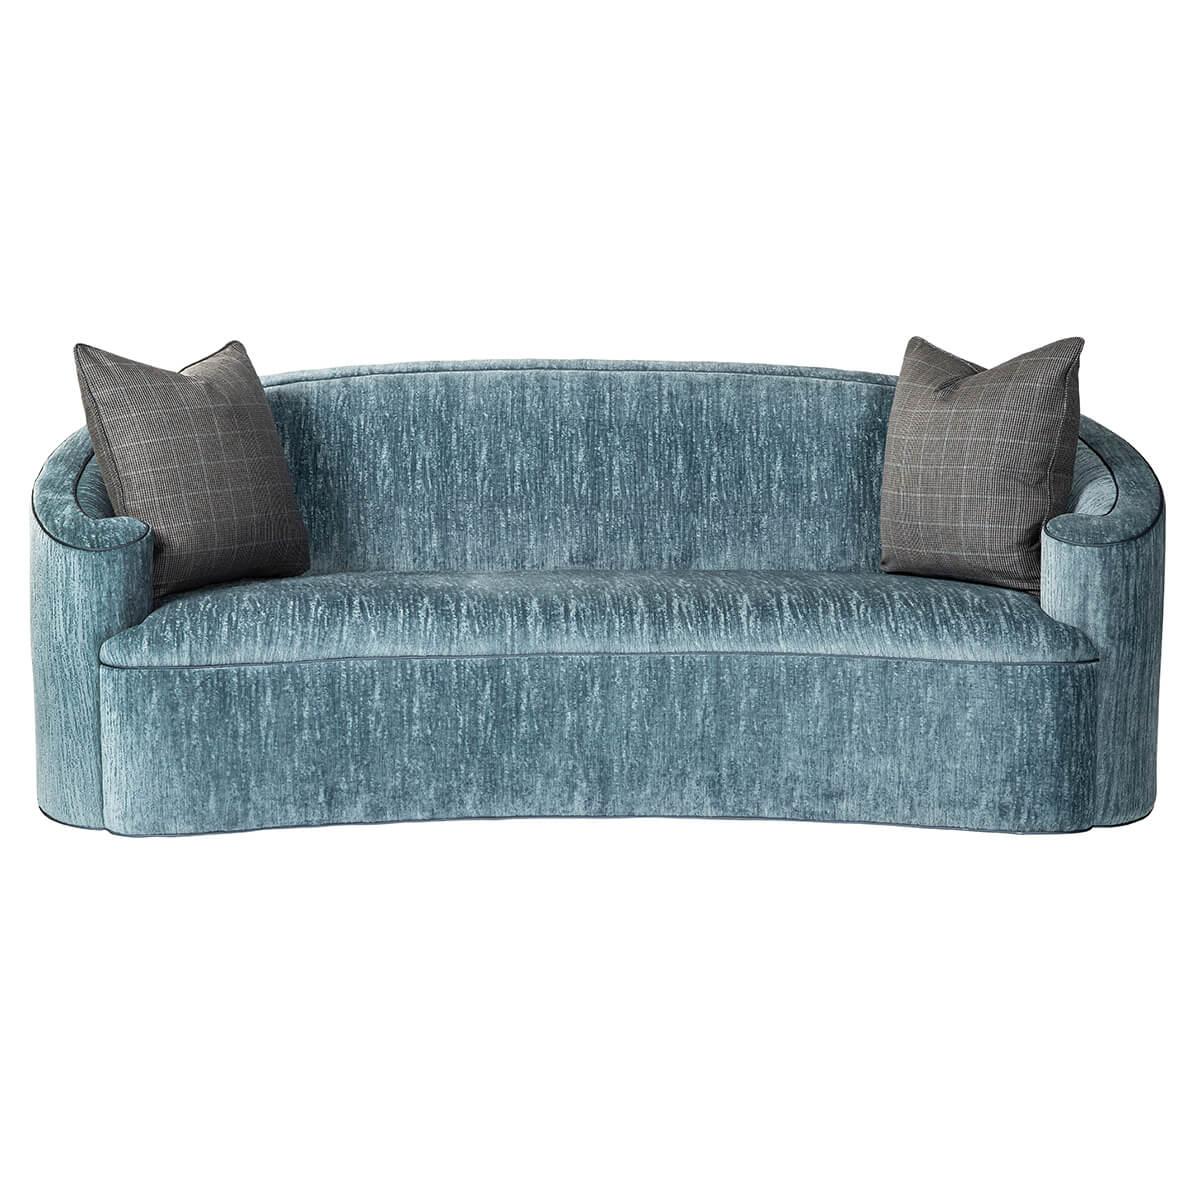 An Art Deco-inspired C-scroll form back upholstered sofa with curbed back and scroll form arms, a tight concave fronted seat with two throw pillows, and an over upholstered base.
Dimensions: 82